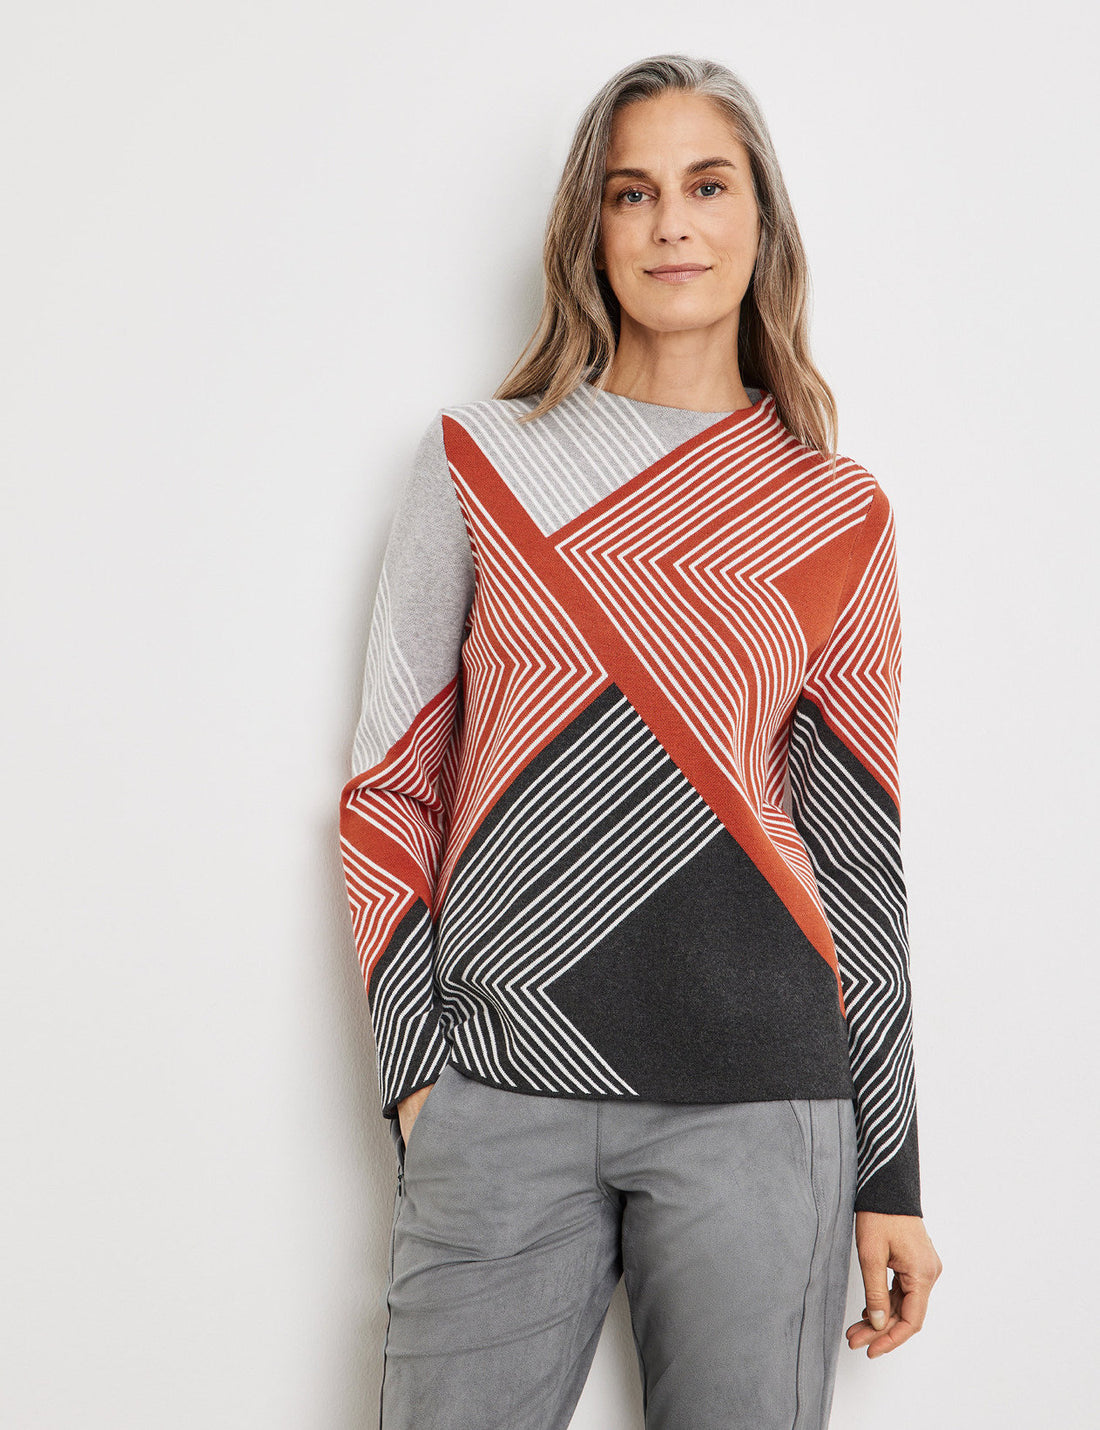 Jumper In A Jacquard Look With A Graphic Pattern_271012-35701_2070_01